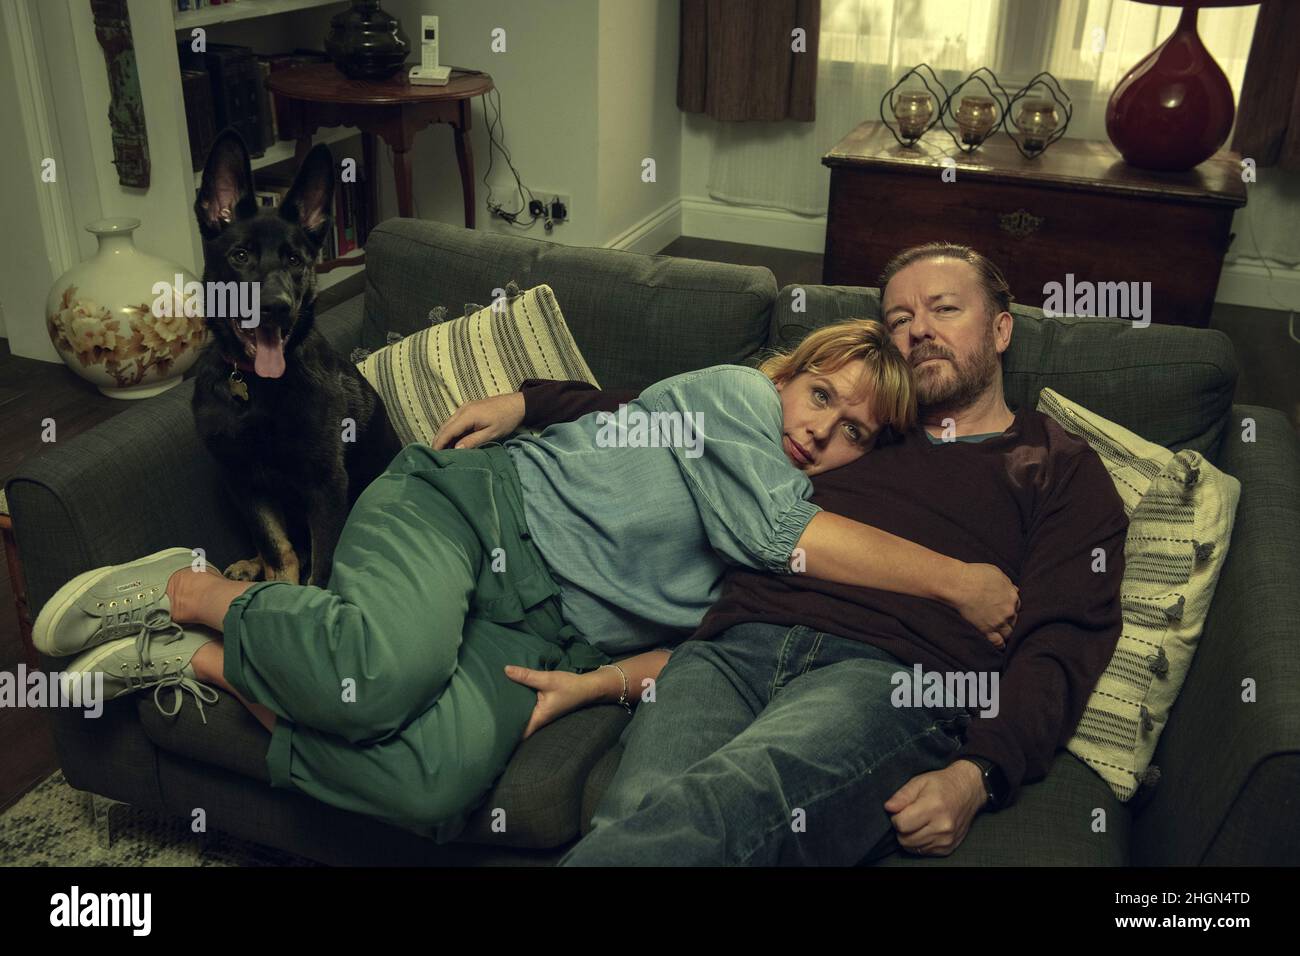 RICKY GERVAIS and ASHLEY JENSEN in AFTER LIFE (2019), directed by RICKY GERVAIS. Credit: NETFLIX / Album Stock Photo